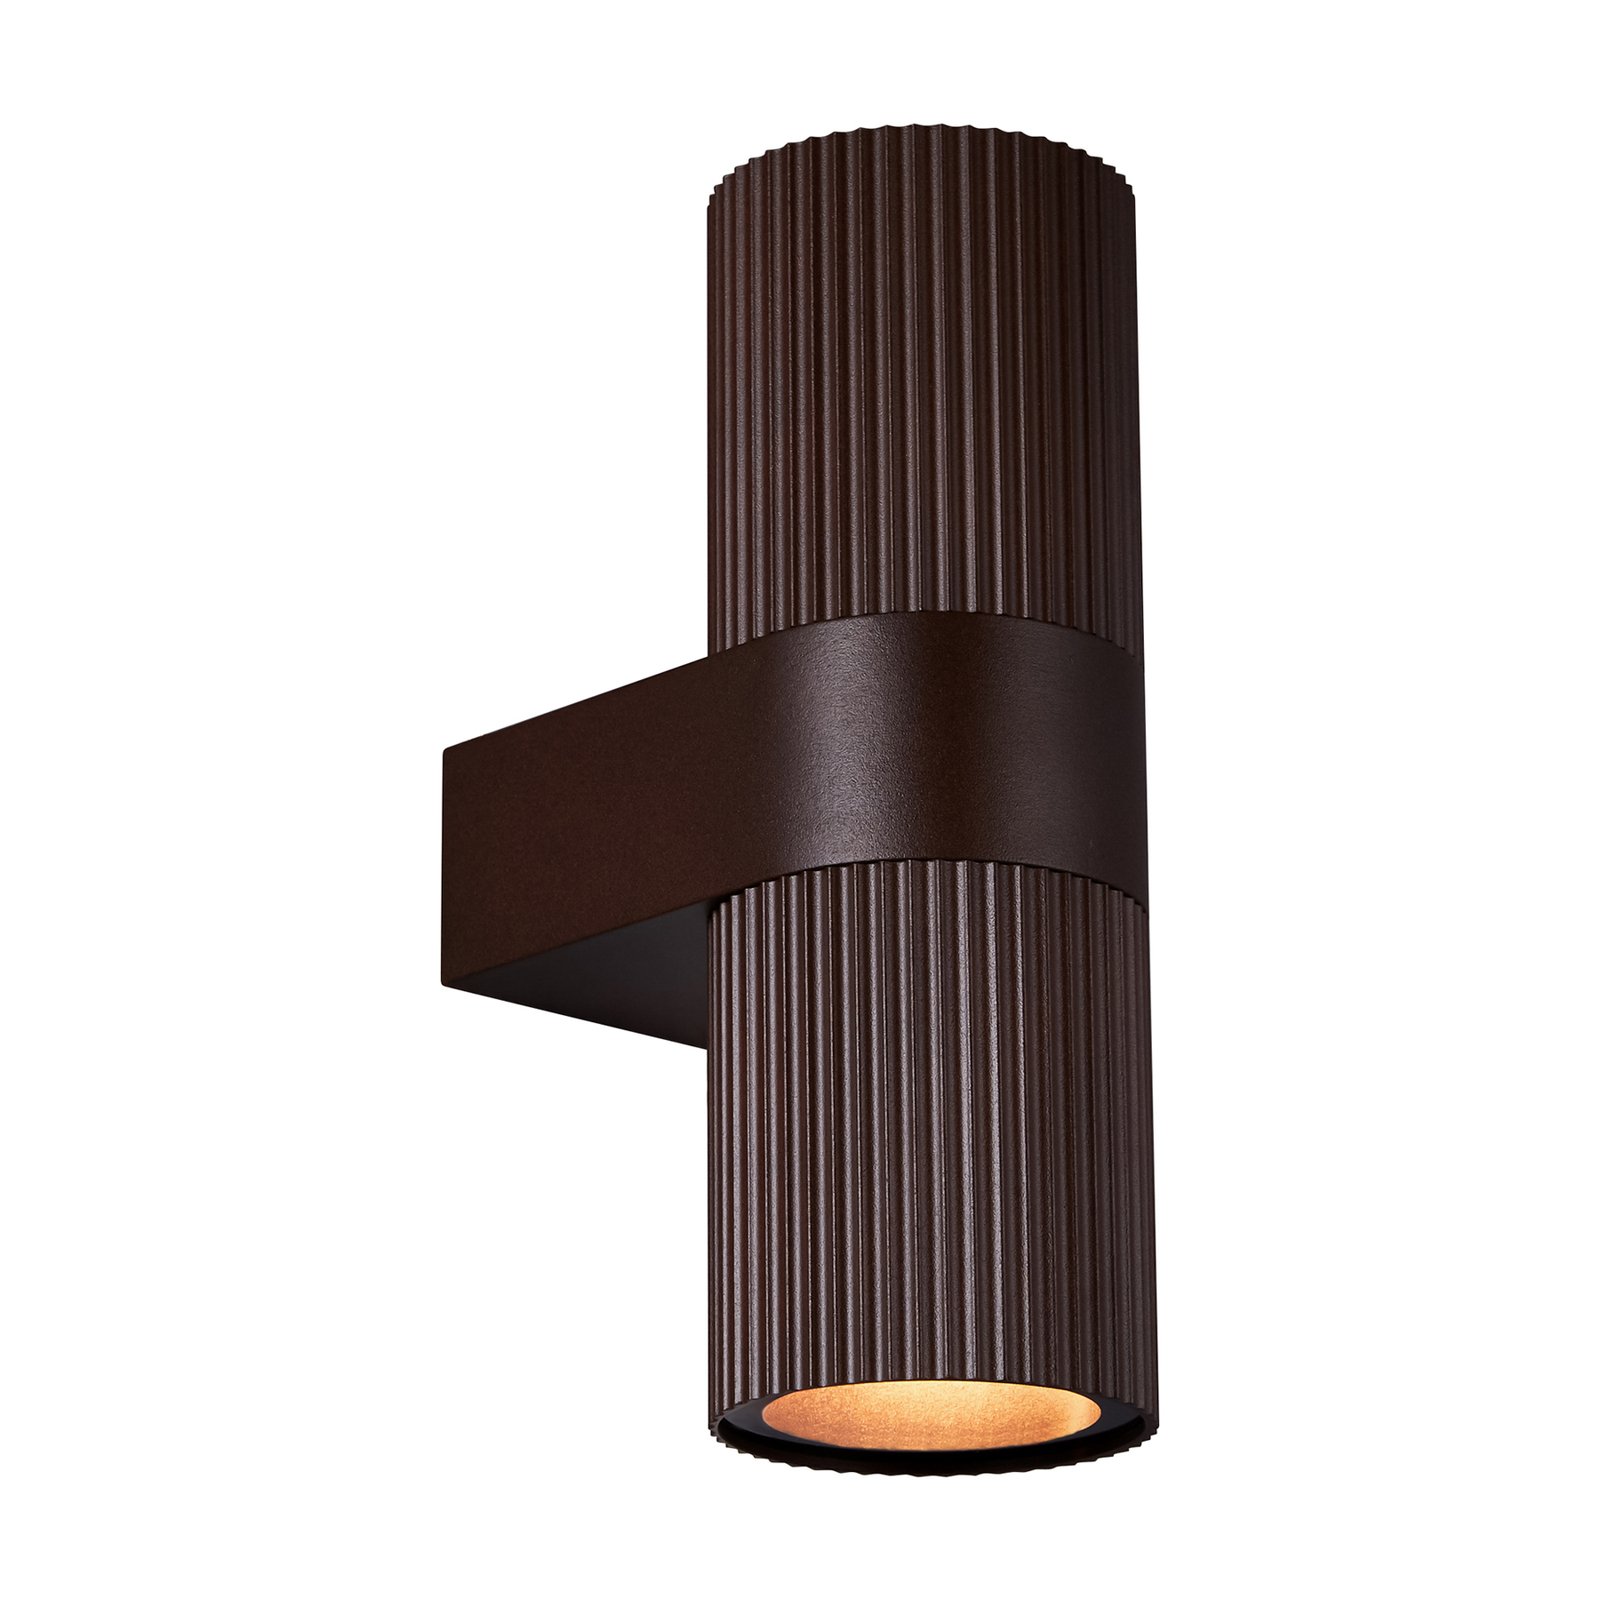 Kyklop Ripple outdoor wall light up/down, rust